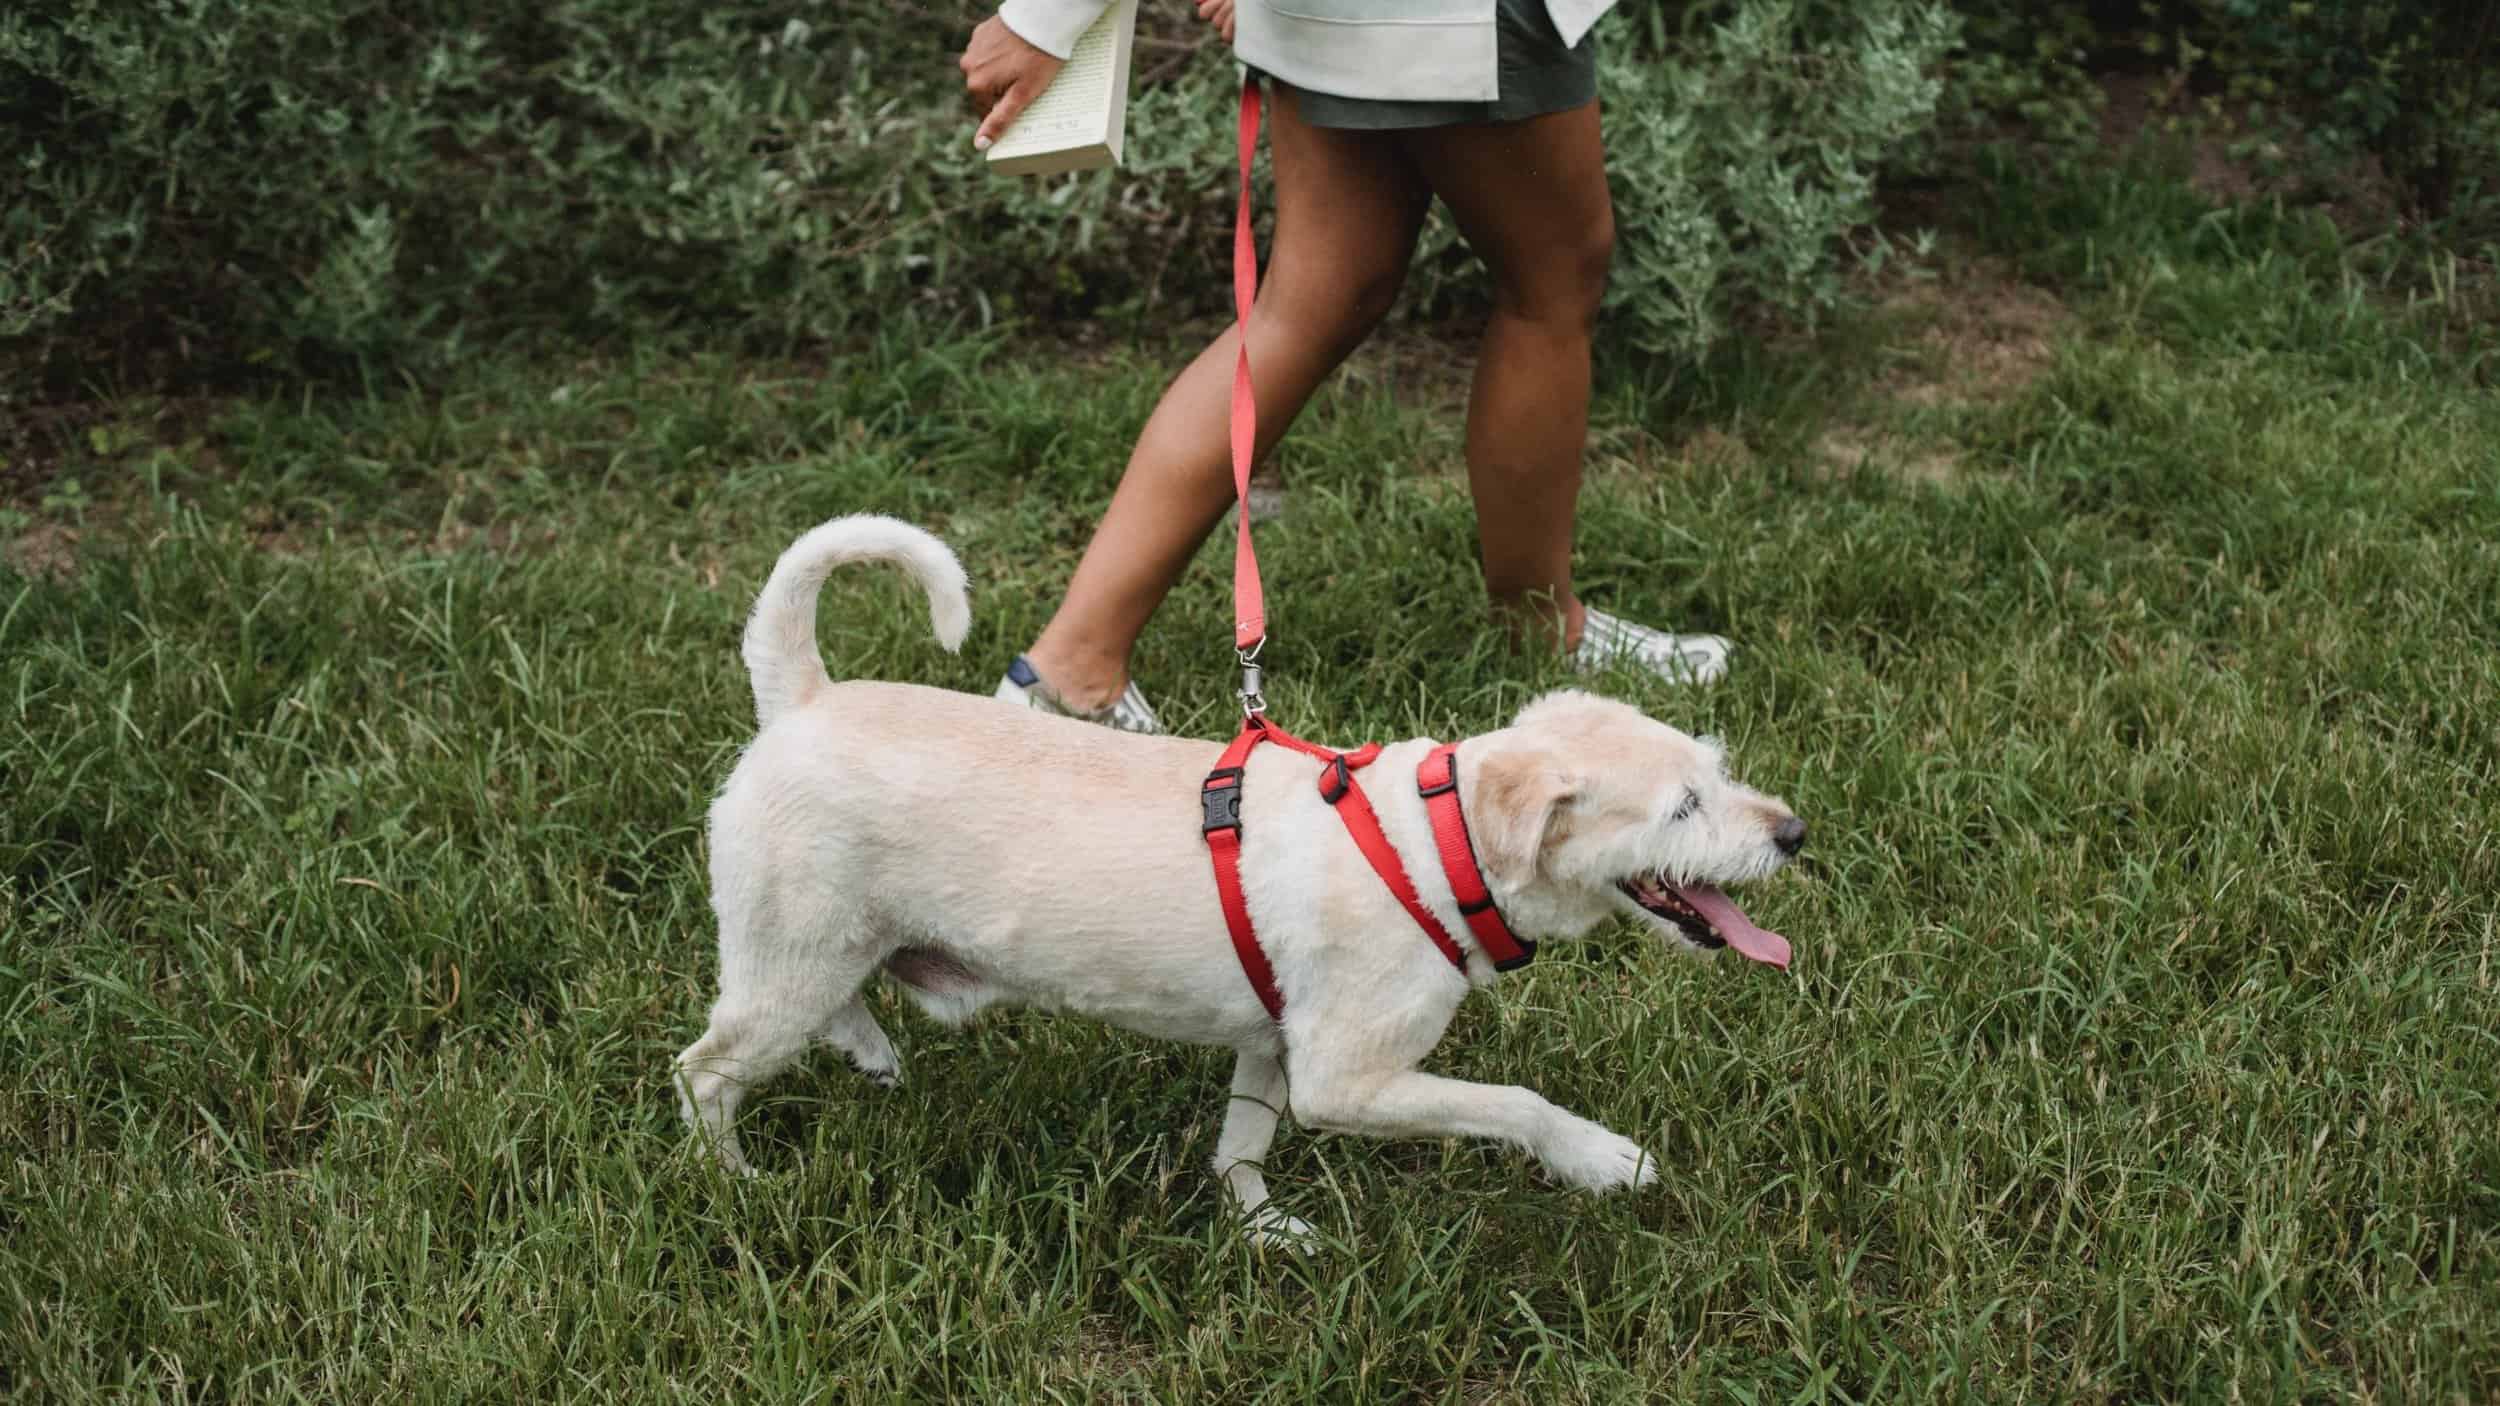 dog wearing red harness walking on grass